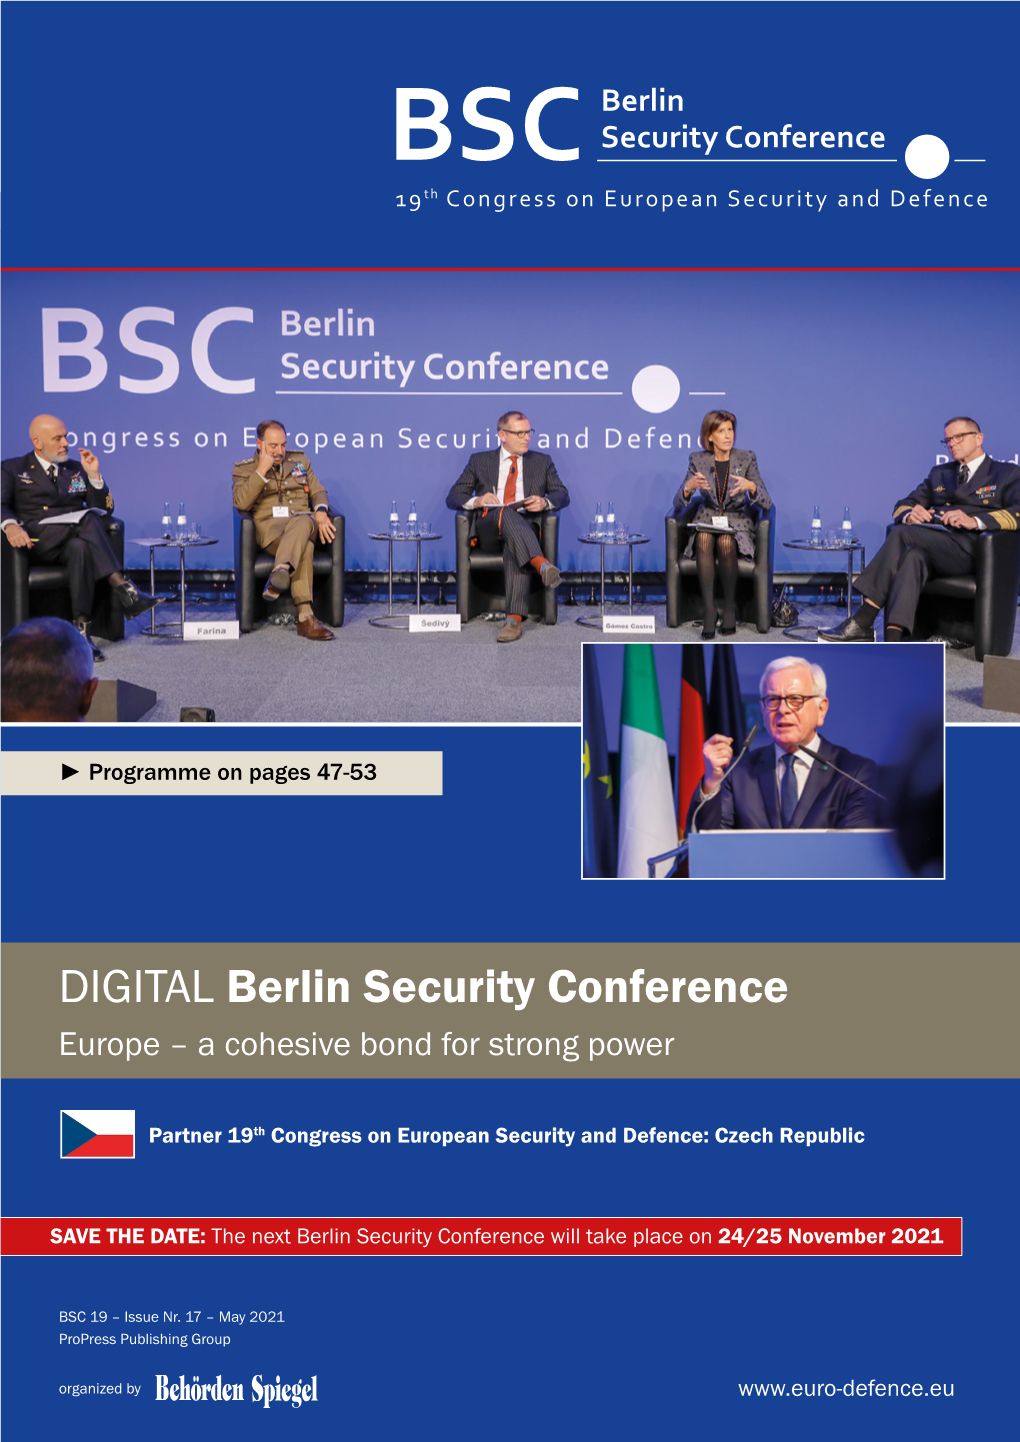 DIGITAL Berlin Security Conference Europe – a Cohesive Bond for Strong Power